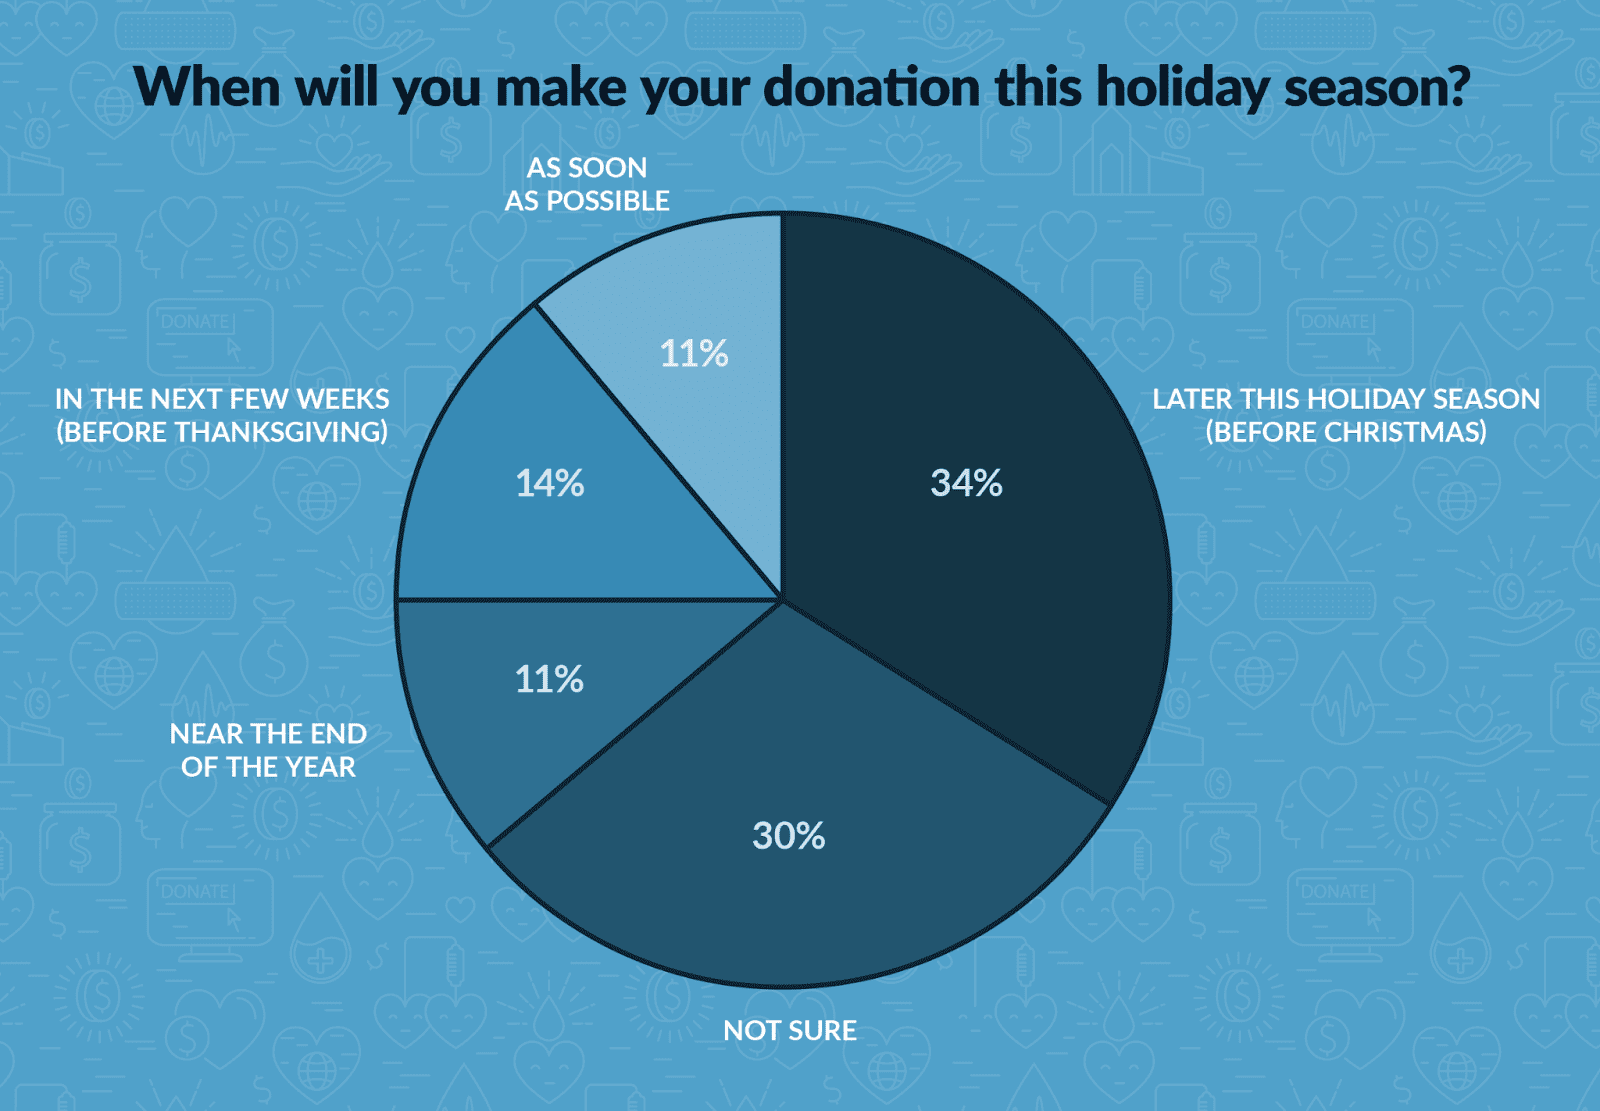 pie chart showing percentages of when people are donating this year